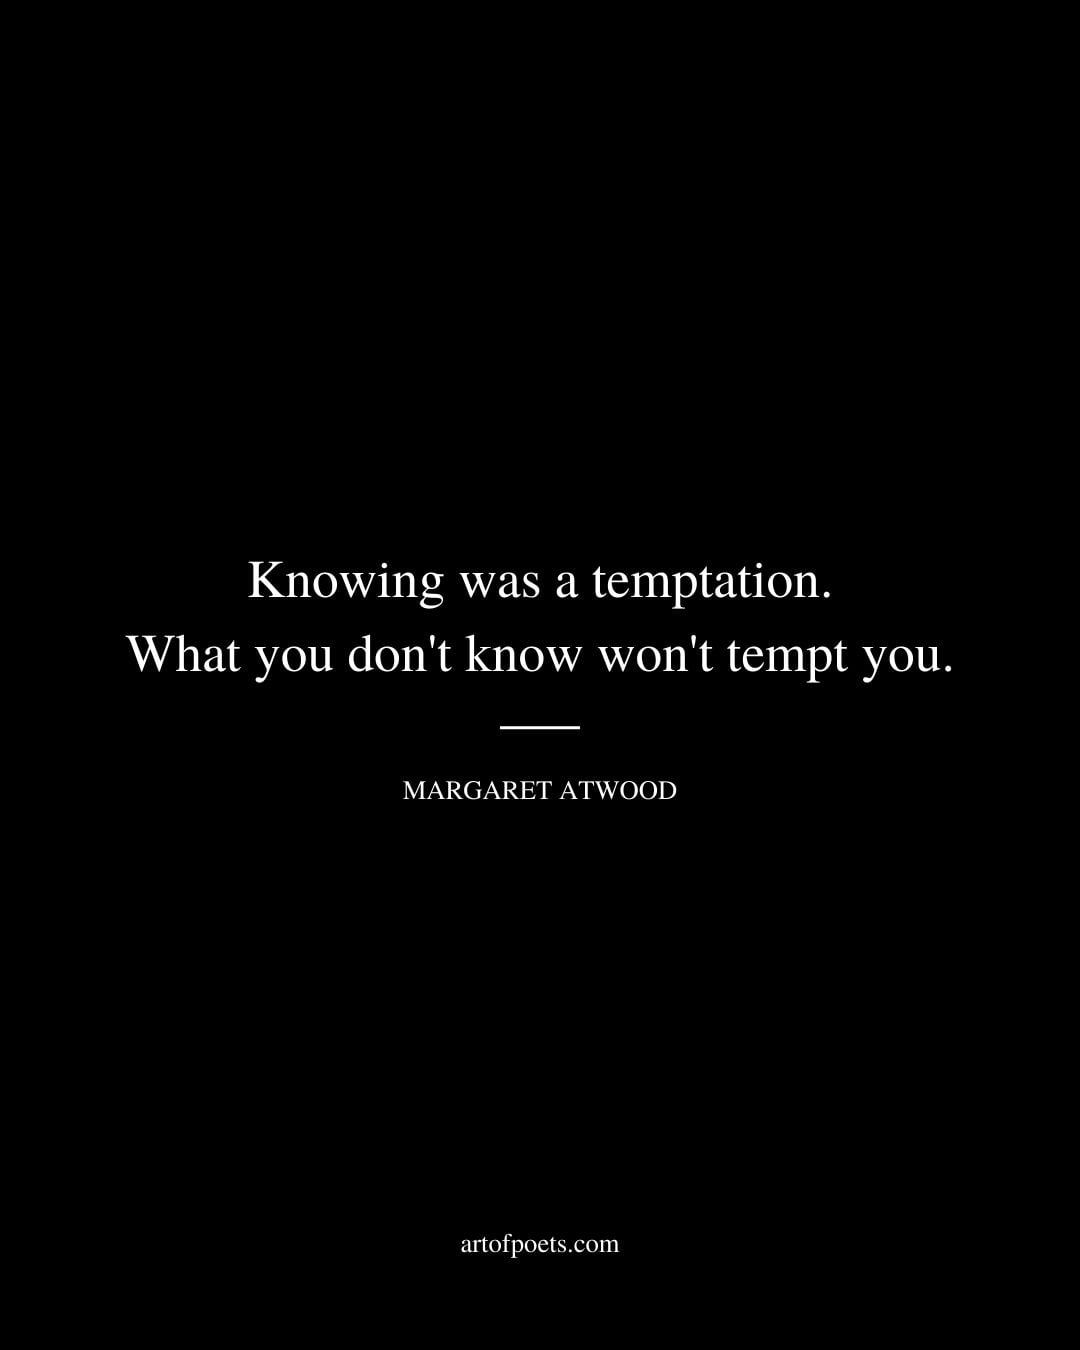 Knowing was a temptation. What you dont know wont tempt you. Margaret Atwood